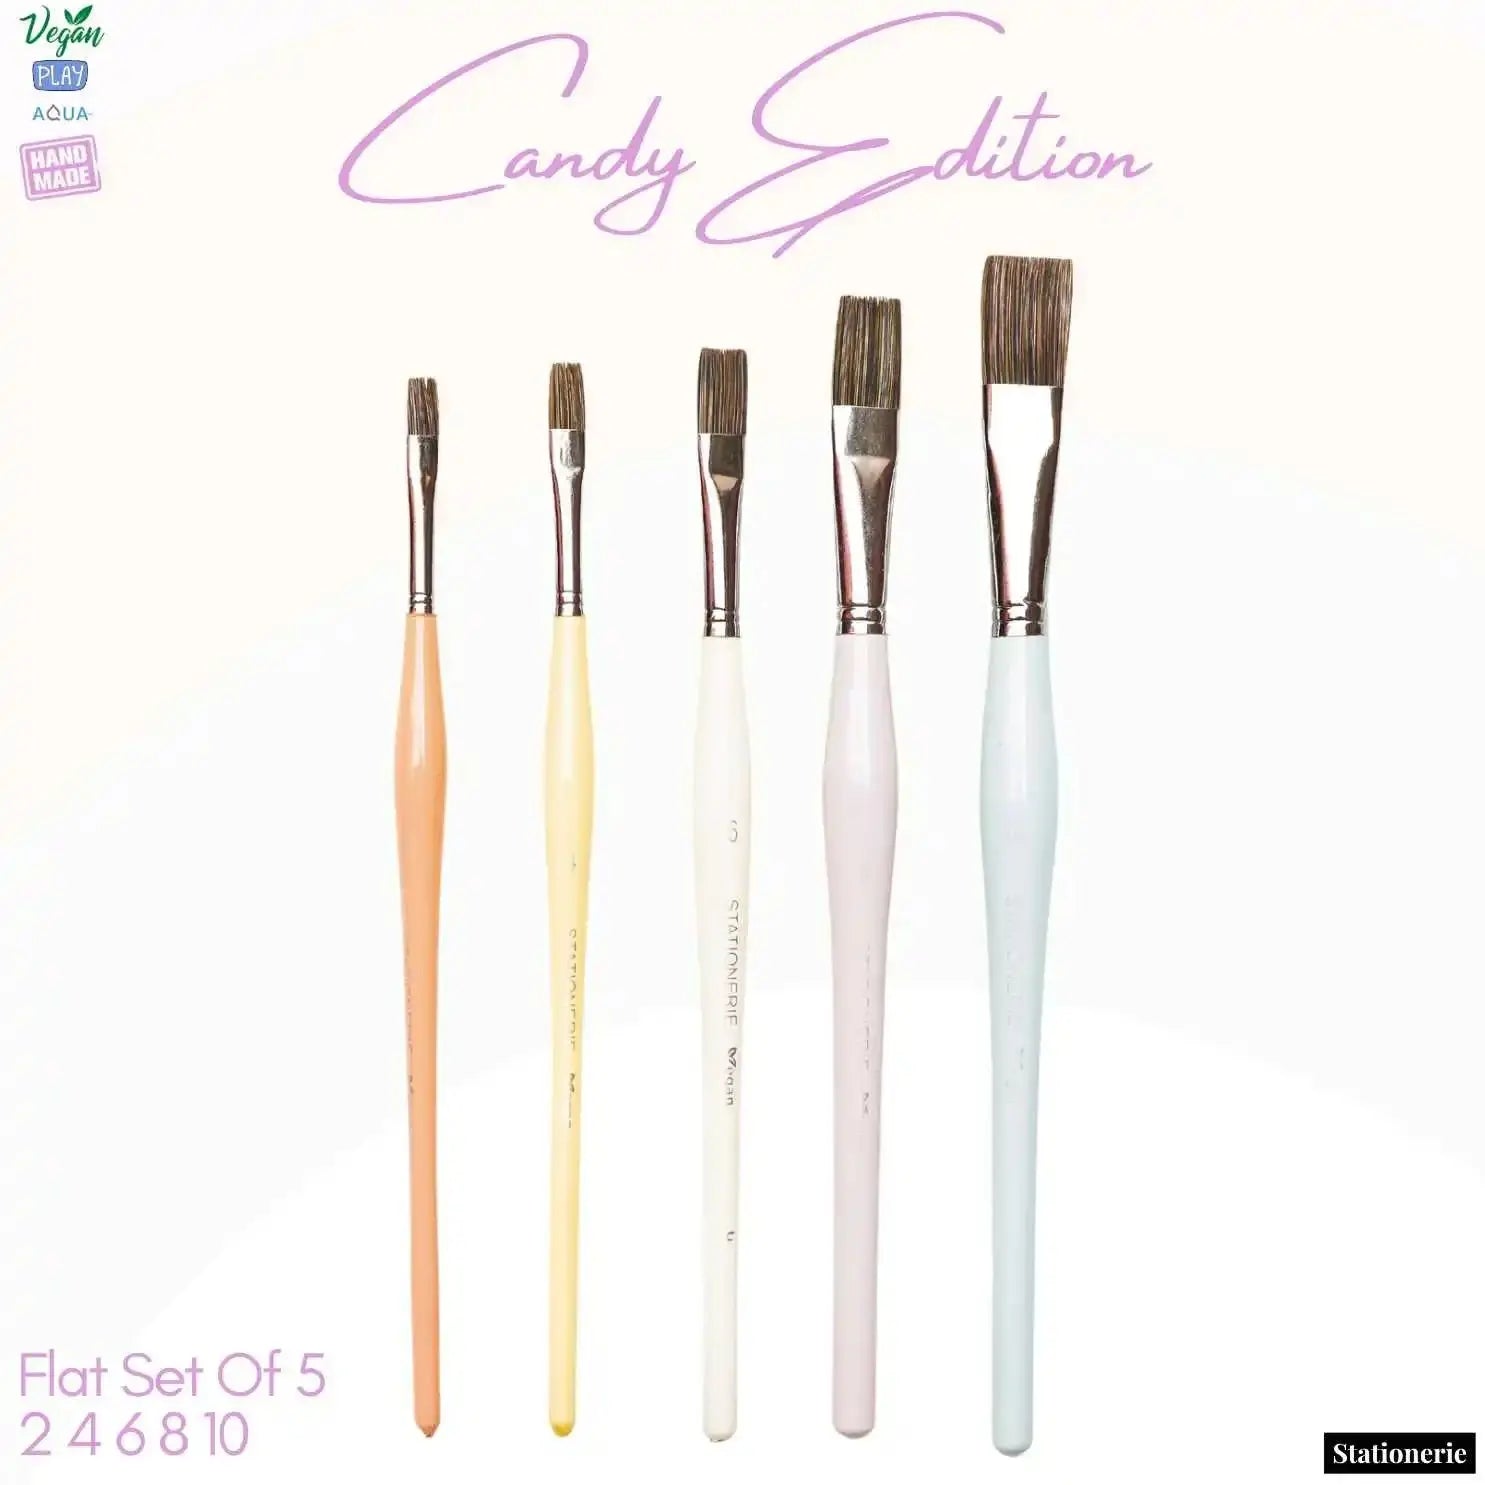 Stationerie Signature Flat Brush Set Of 5 Candy Edition Stationerie